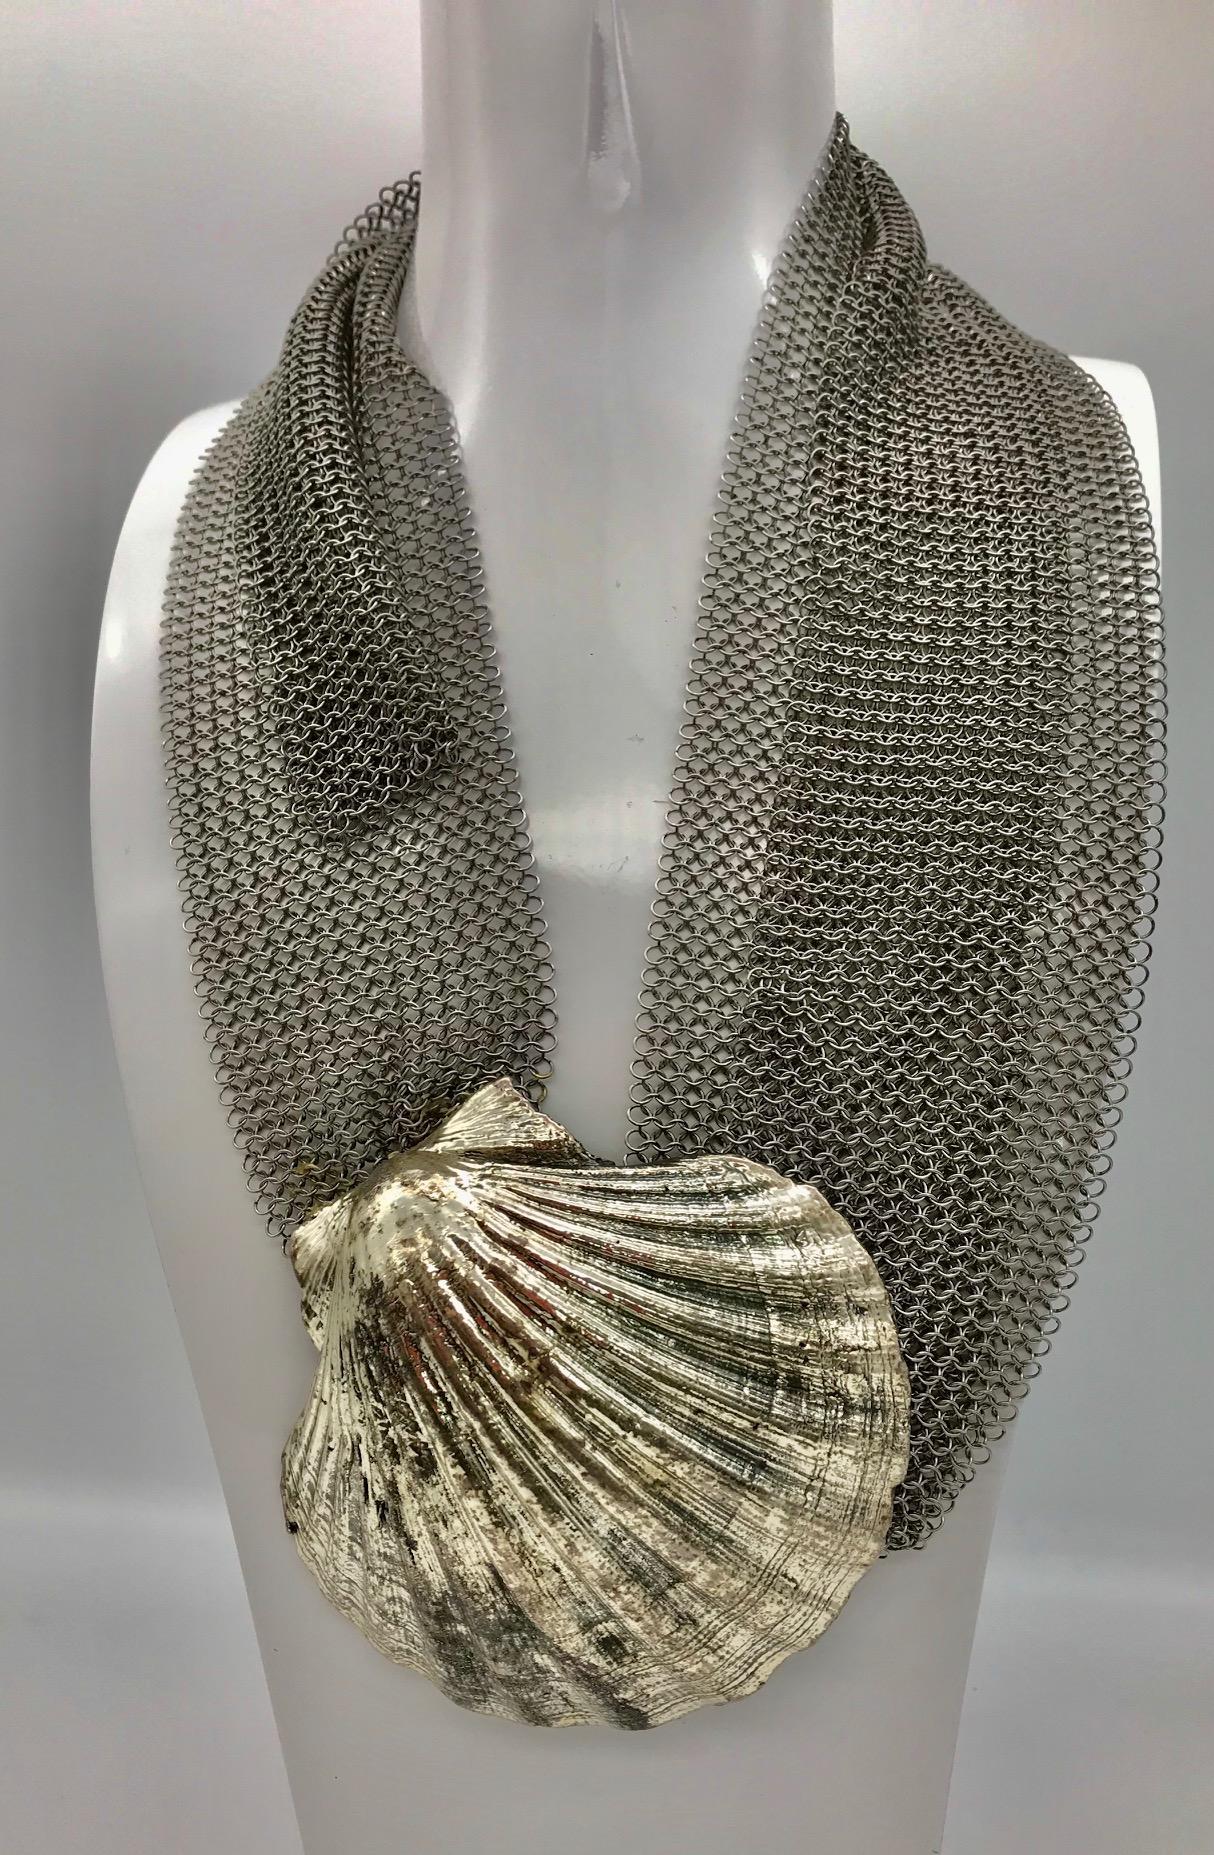 Silvered Shell Buckle on Stainless Steel Mesh Belt, can be worn as a Belt or as a Necklace. This piece is unique it was silvered in Rome and worn on a Fashion Show. 
Sylvia Gottwald's creation's are all one of a kind and hand made ,this particular